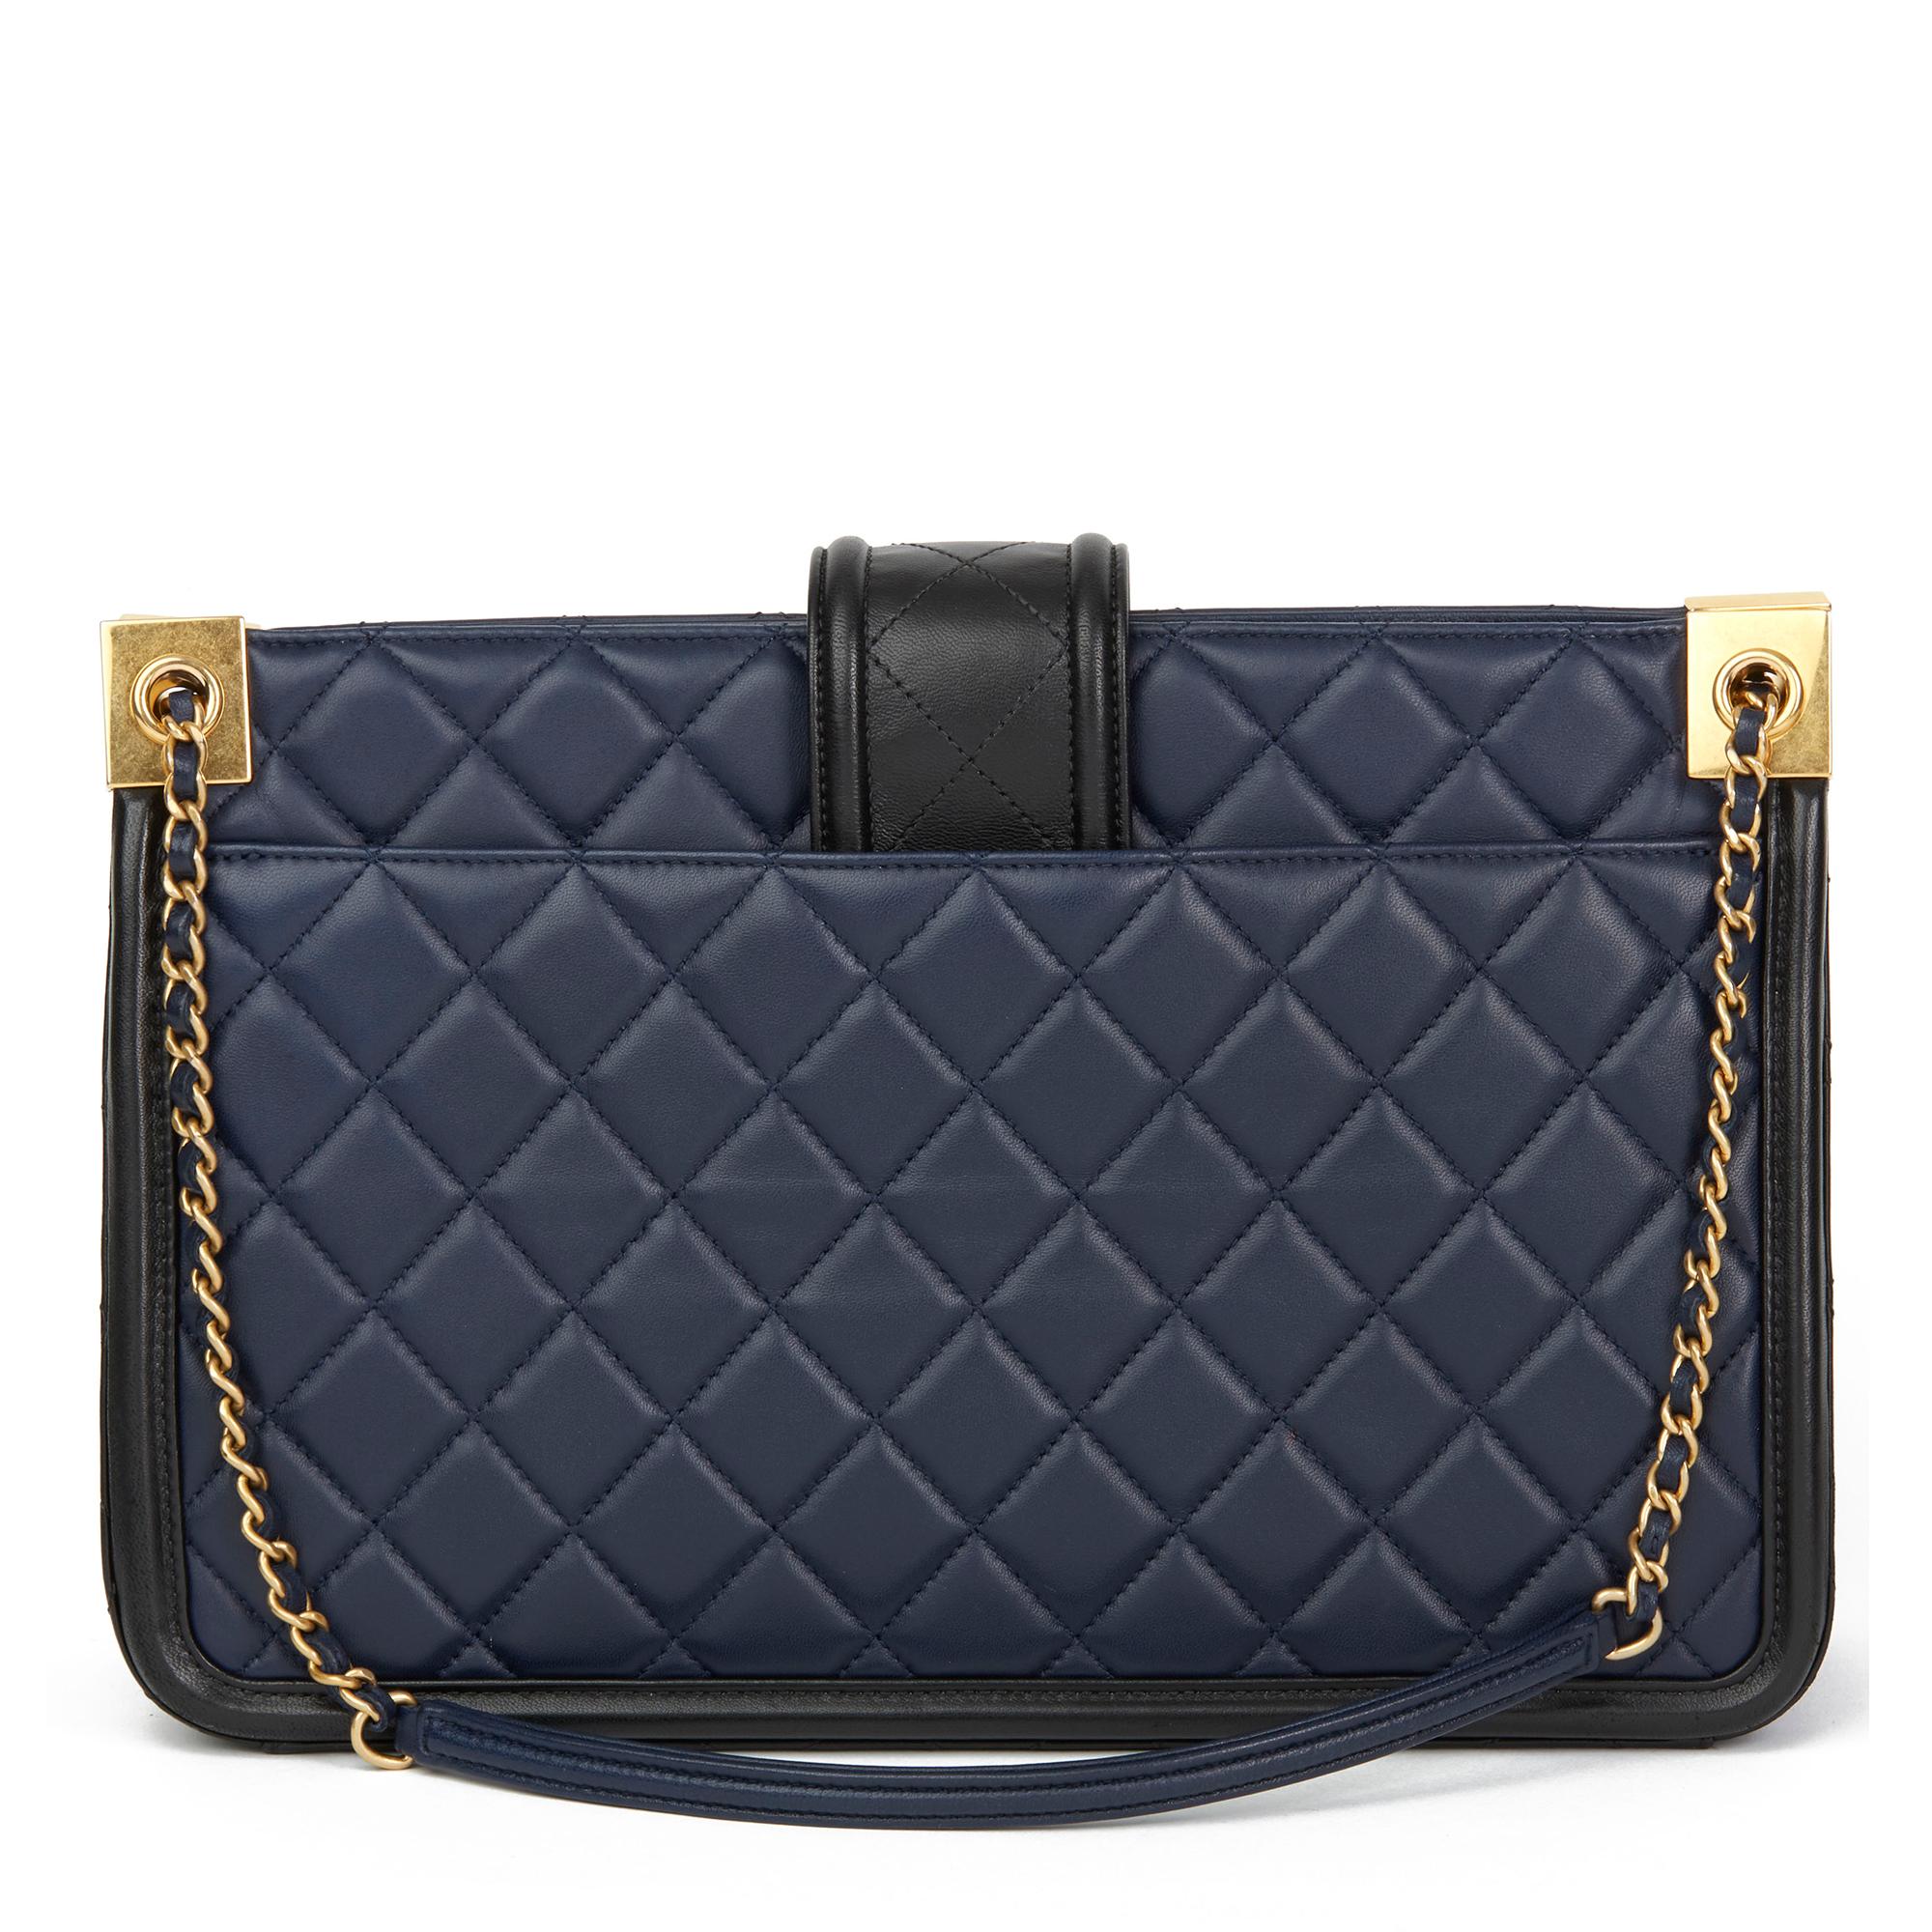 Women's 2015 Chanel Black & Navy Quilted Lambskin Large Shopping Tote